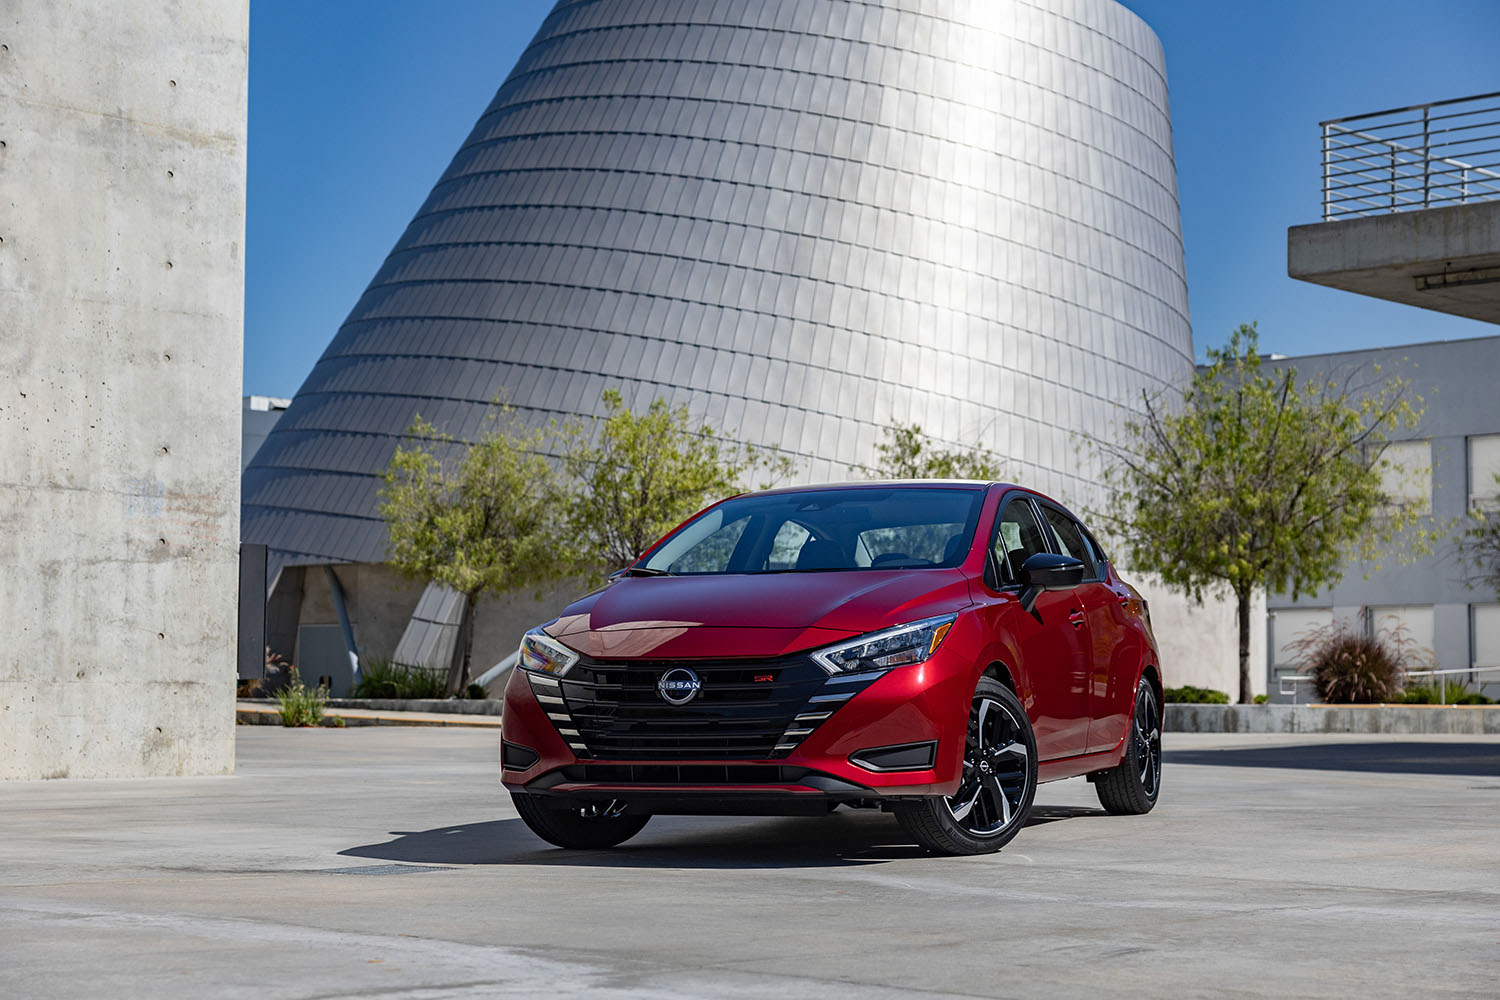 Red Nissan Versa parked in front of metal and concrete structures